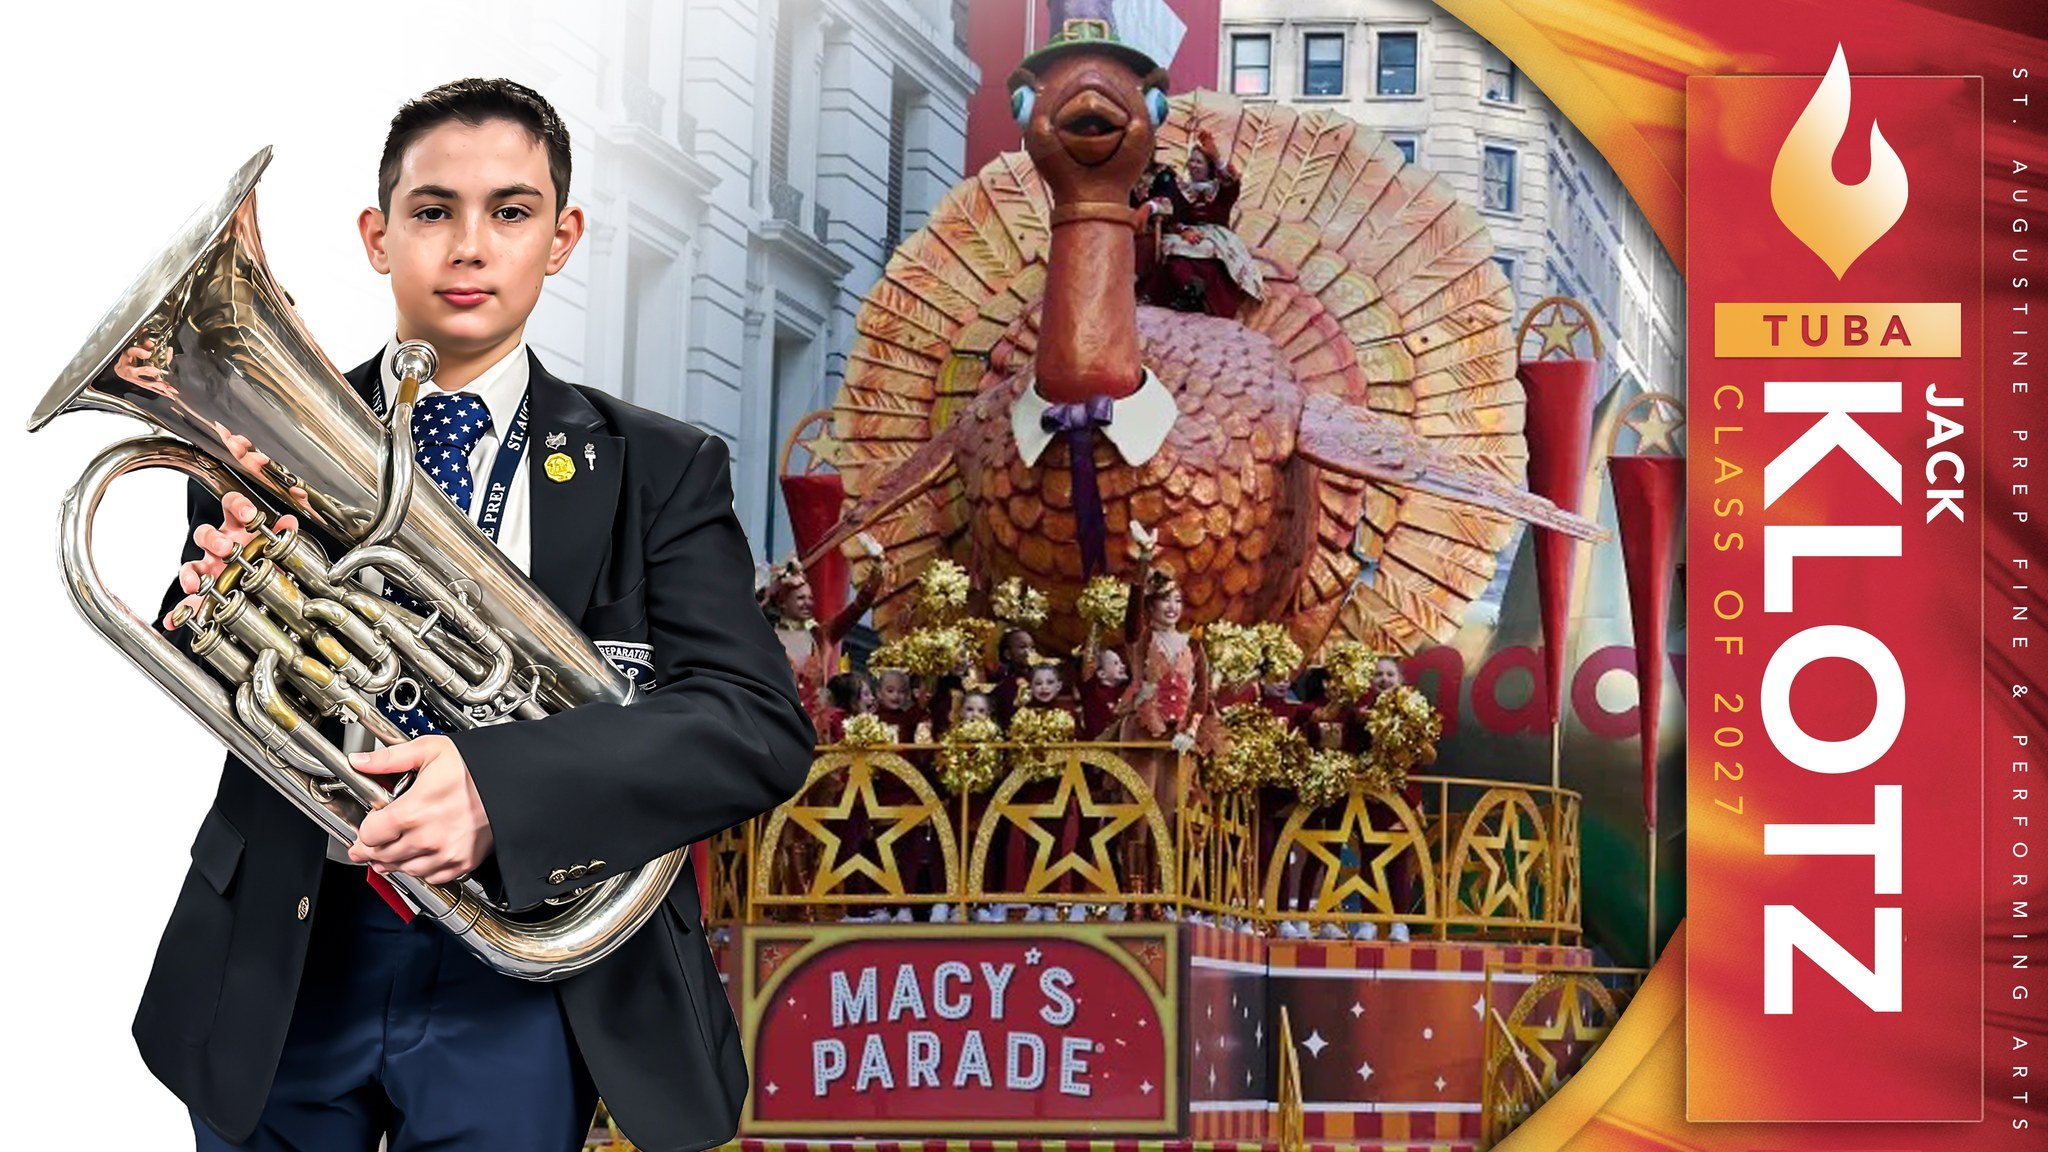 🍂 🦃 🎺 Breaking News: St. Augustine Prep's own Jack Klotz '27 is set to shine next fall at the 98th Macy's Thanksgiving Day Parade! 

Selected as a member of the prestigious Macy's Great American Marching Band, Jack will represent the school and th